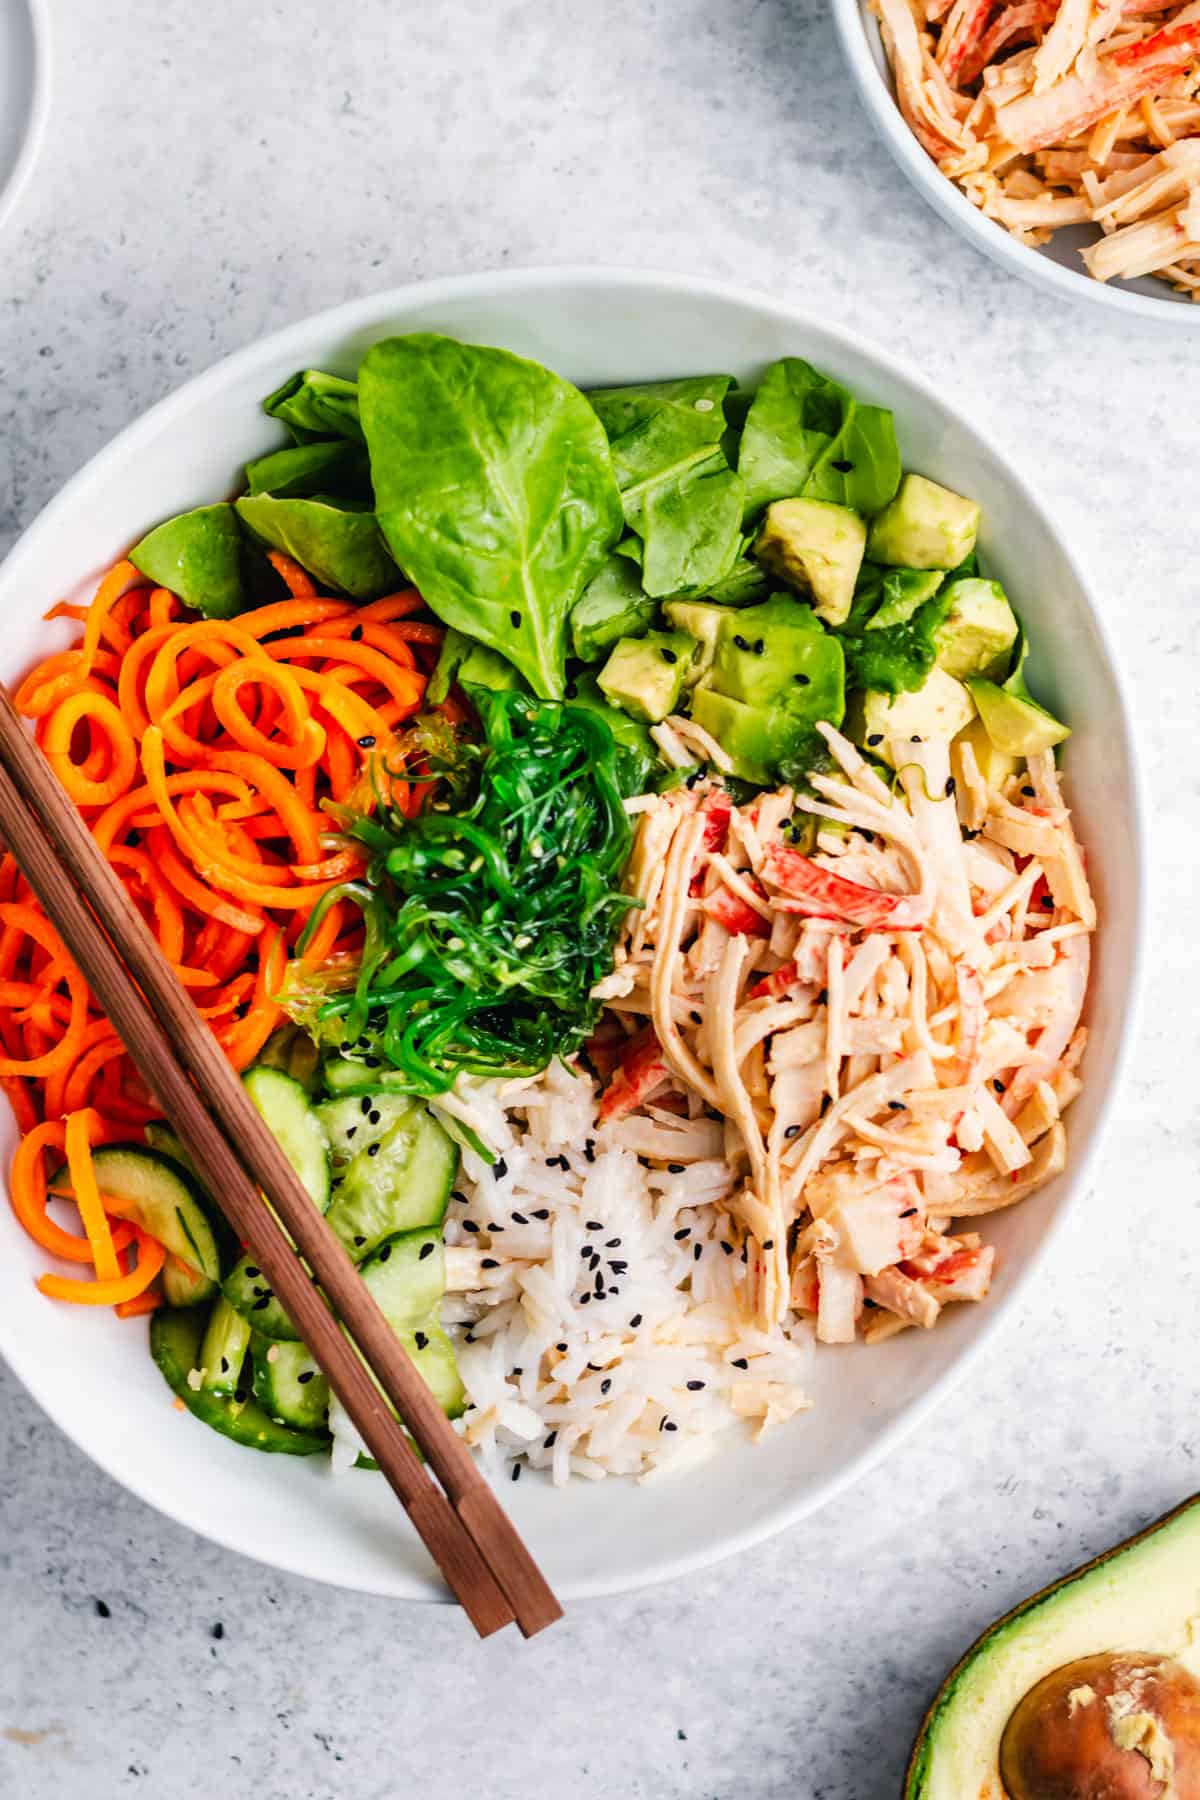 spicy crab salad poke bowl with carrots and spinach leaves on top.